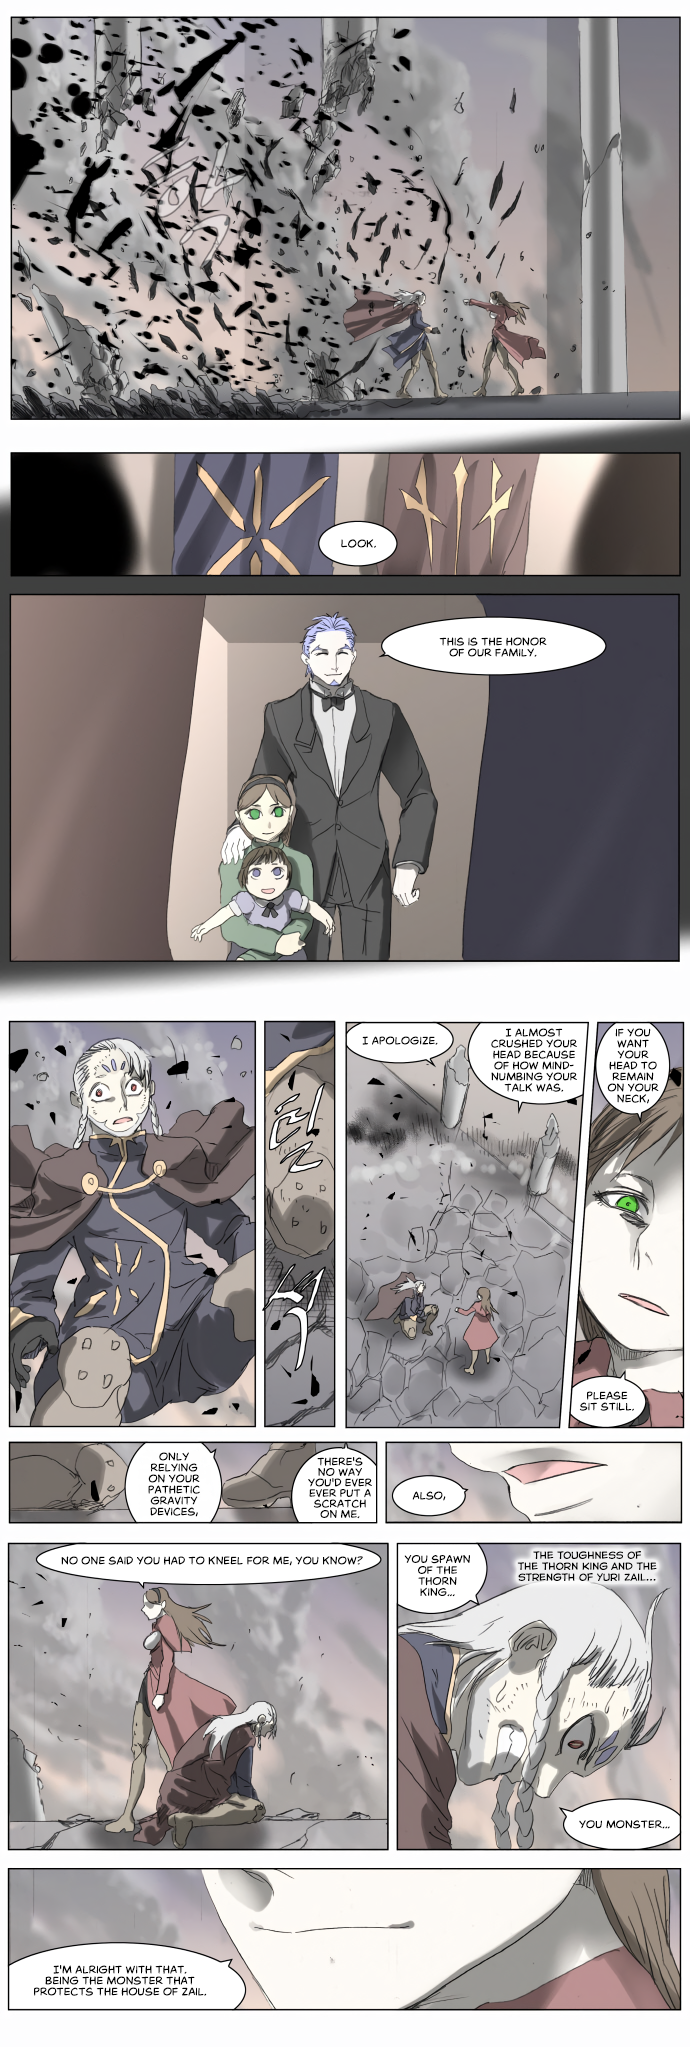 Knight Run Vol.4 Chapter 200: Knight Fall - Part 4 | The Three From Velchees - Picture 2